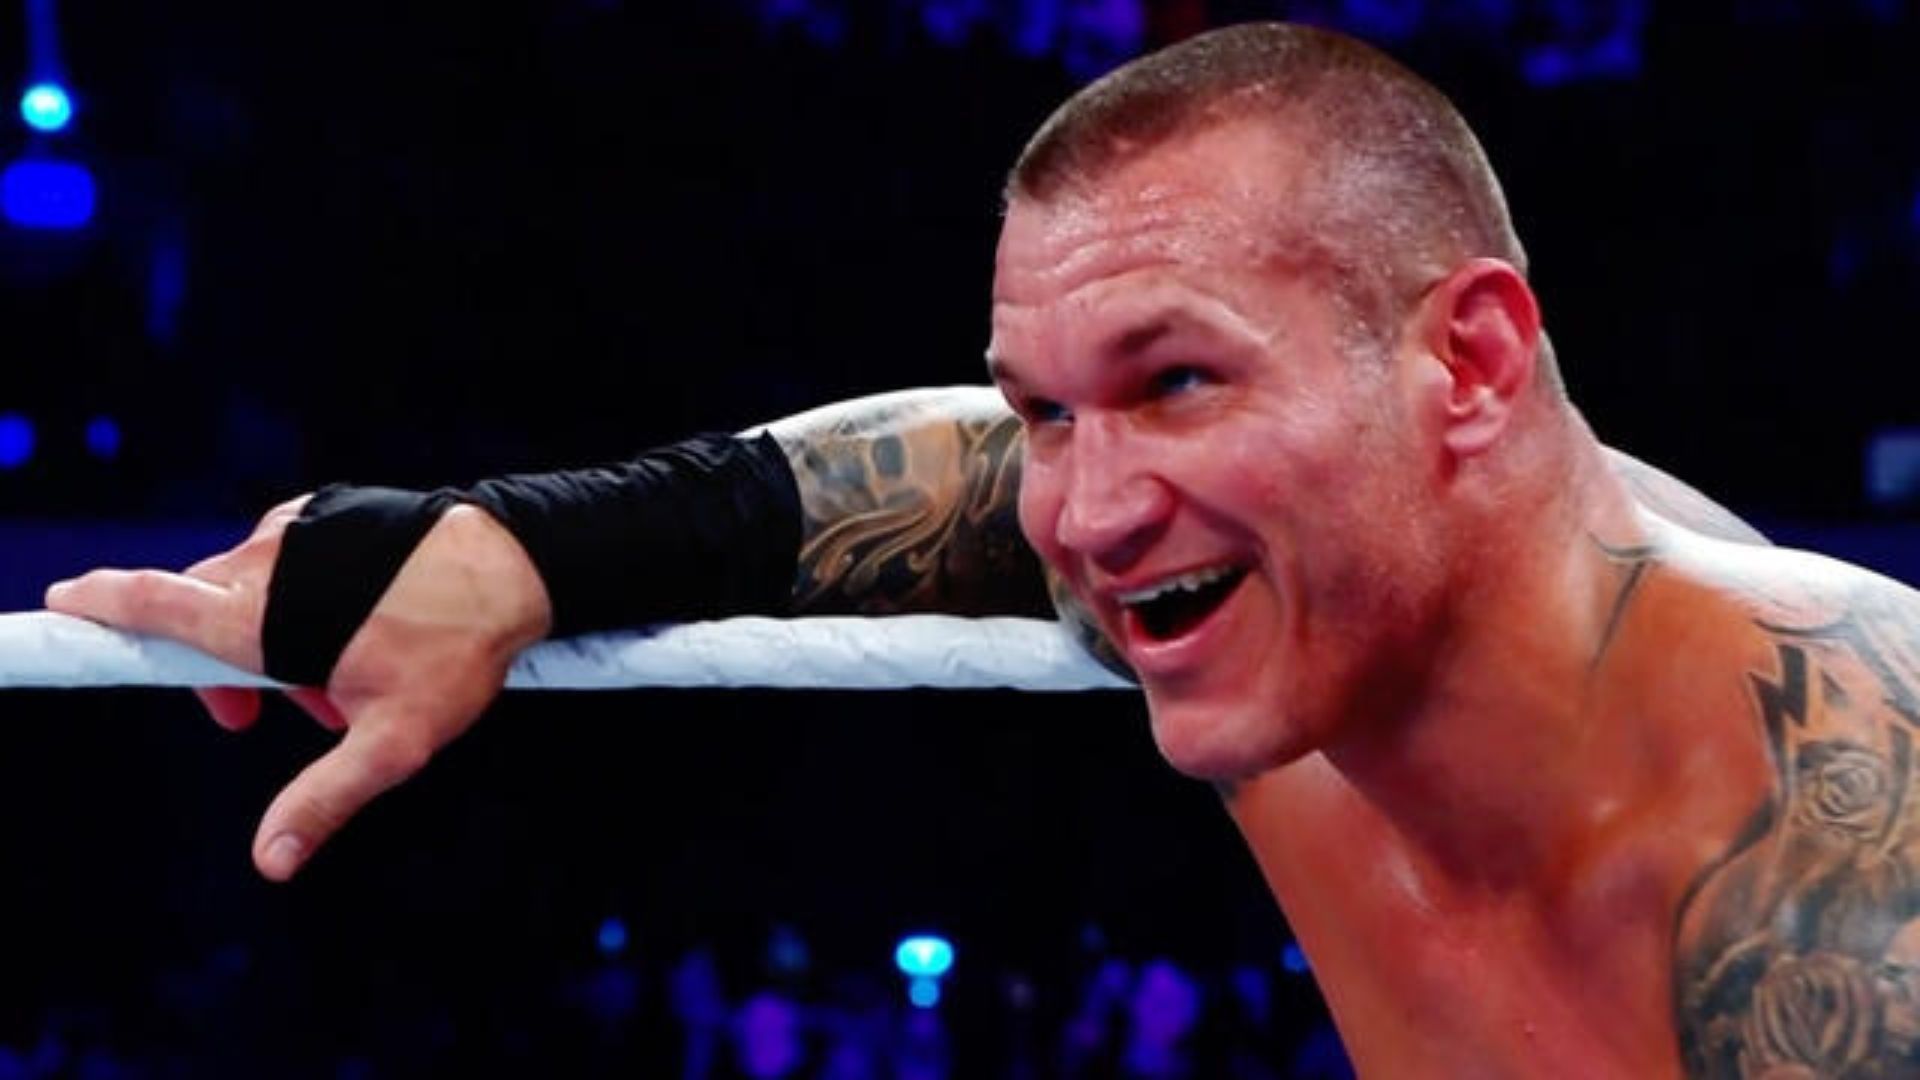 Randy Orton performs on SmackDown [Photo credit: WWE]